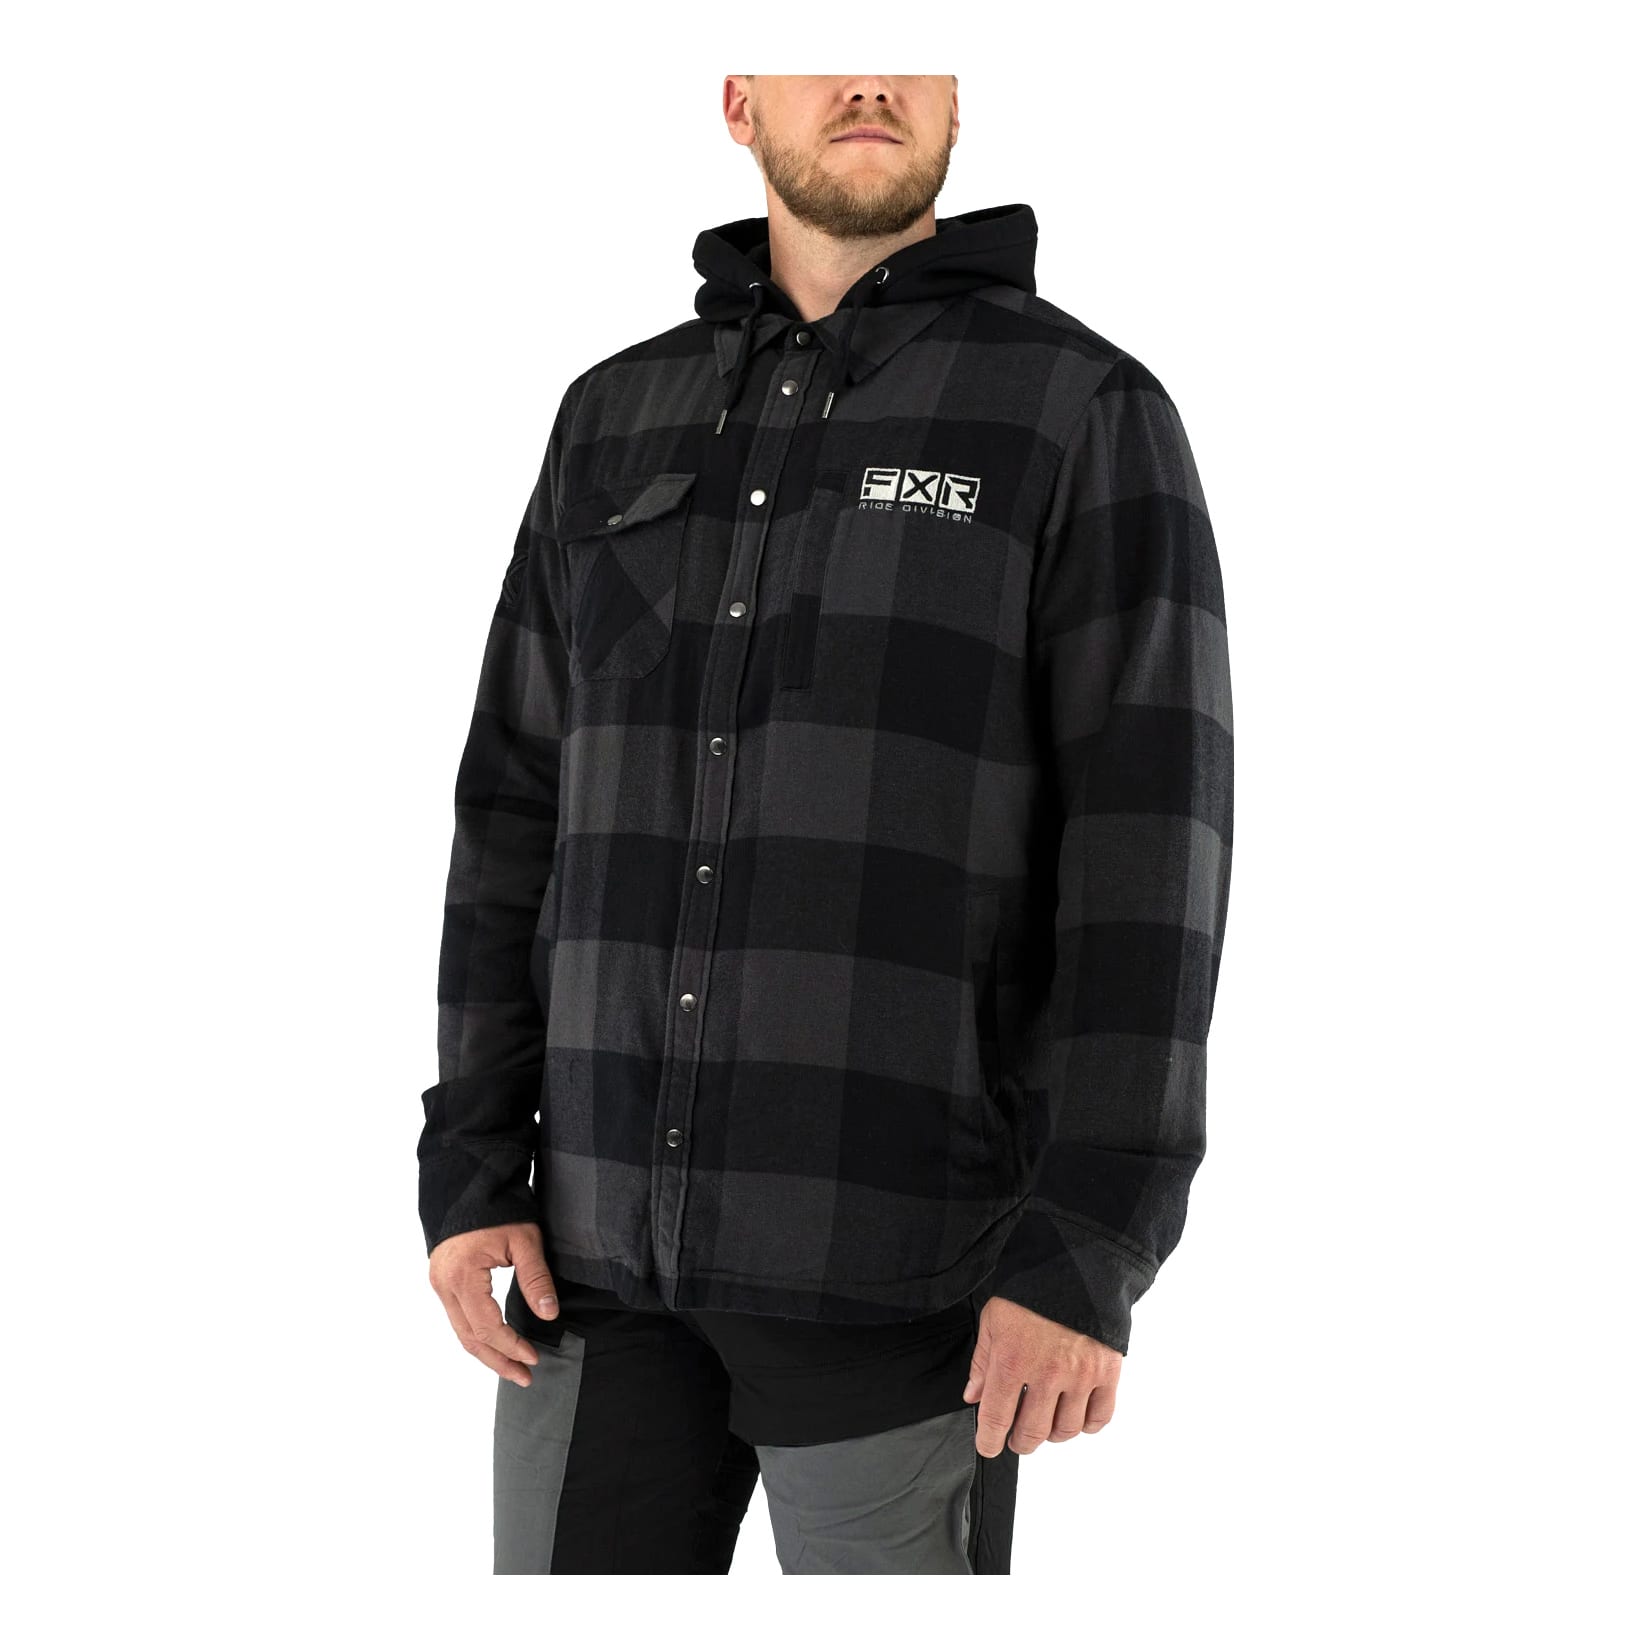 FXR® Men’s Timber Insulated Flannel Jacket